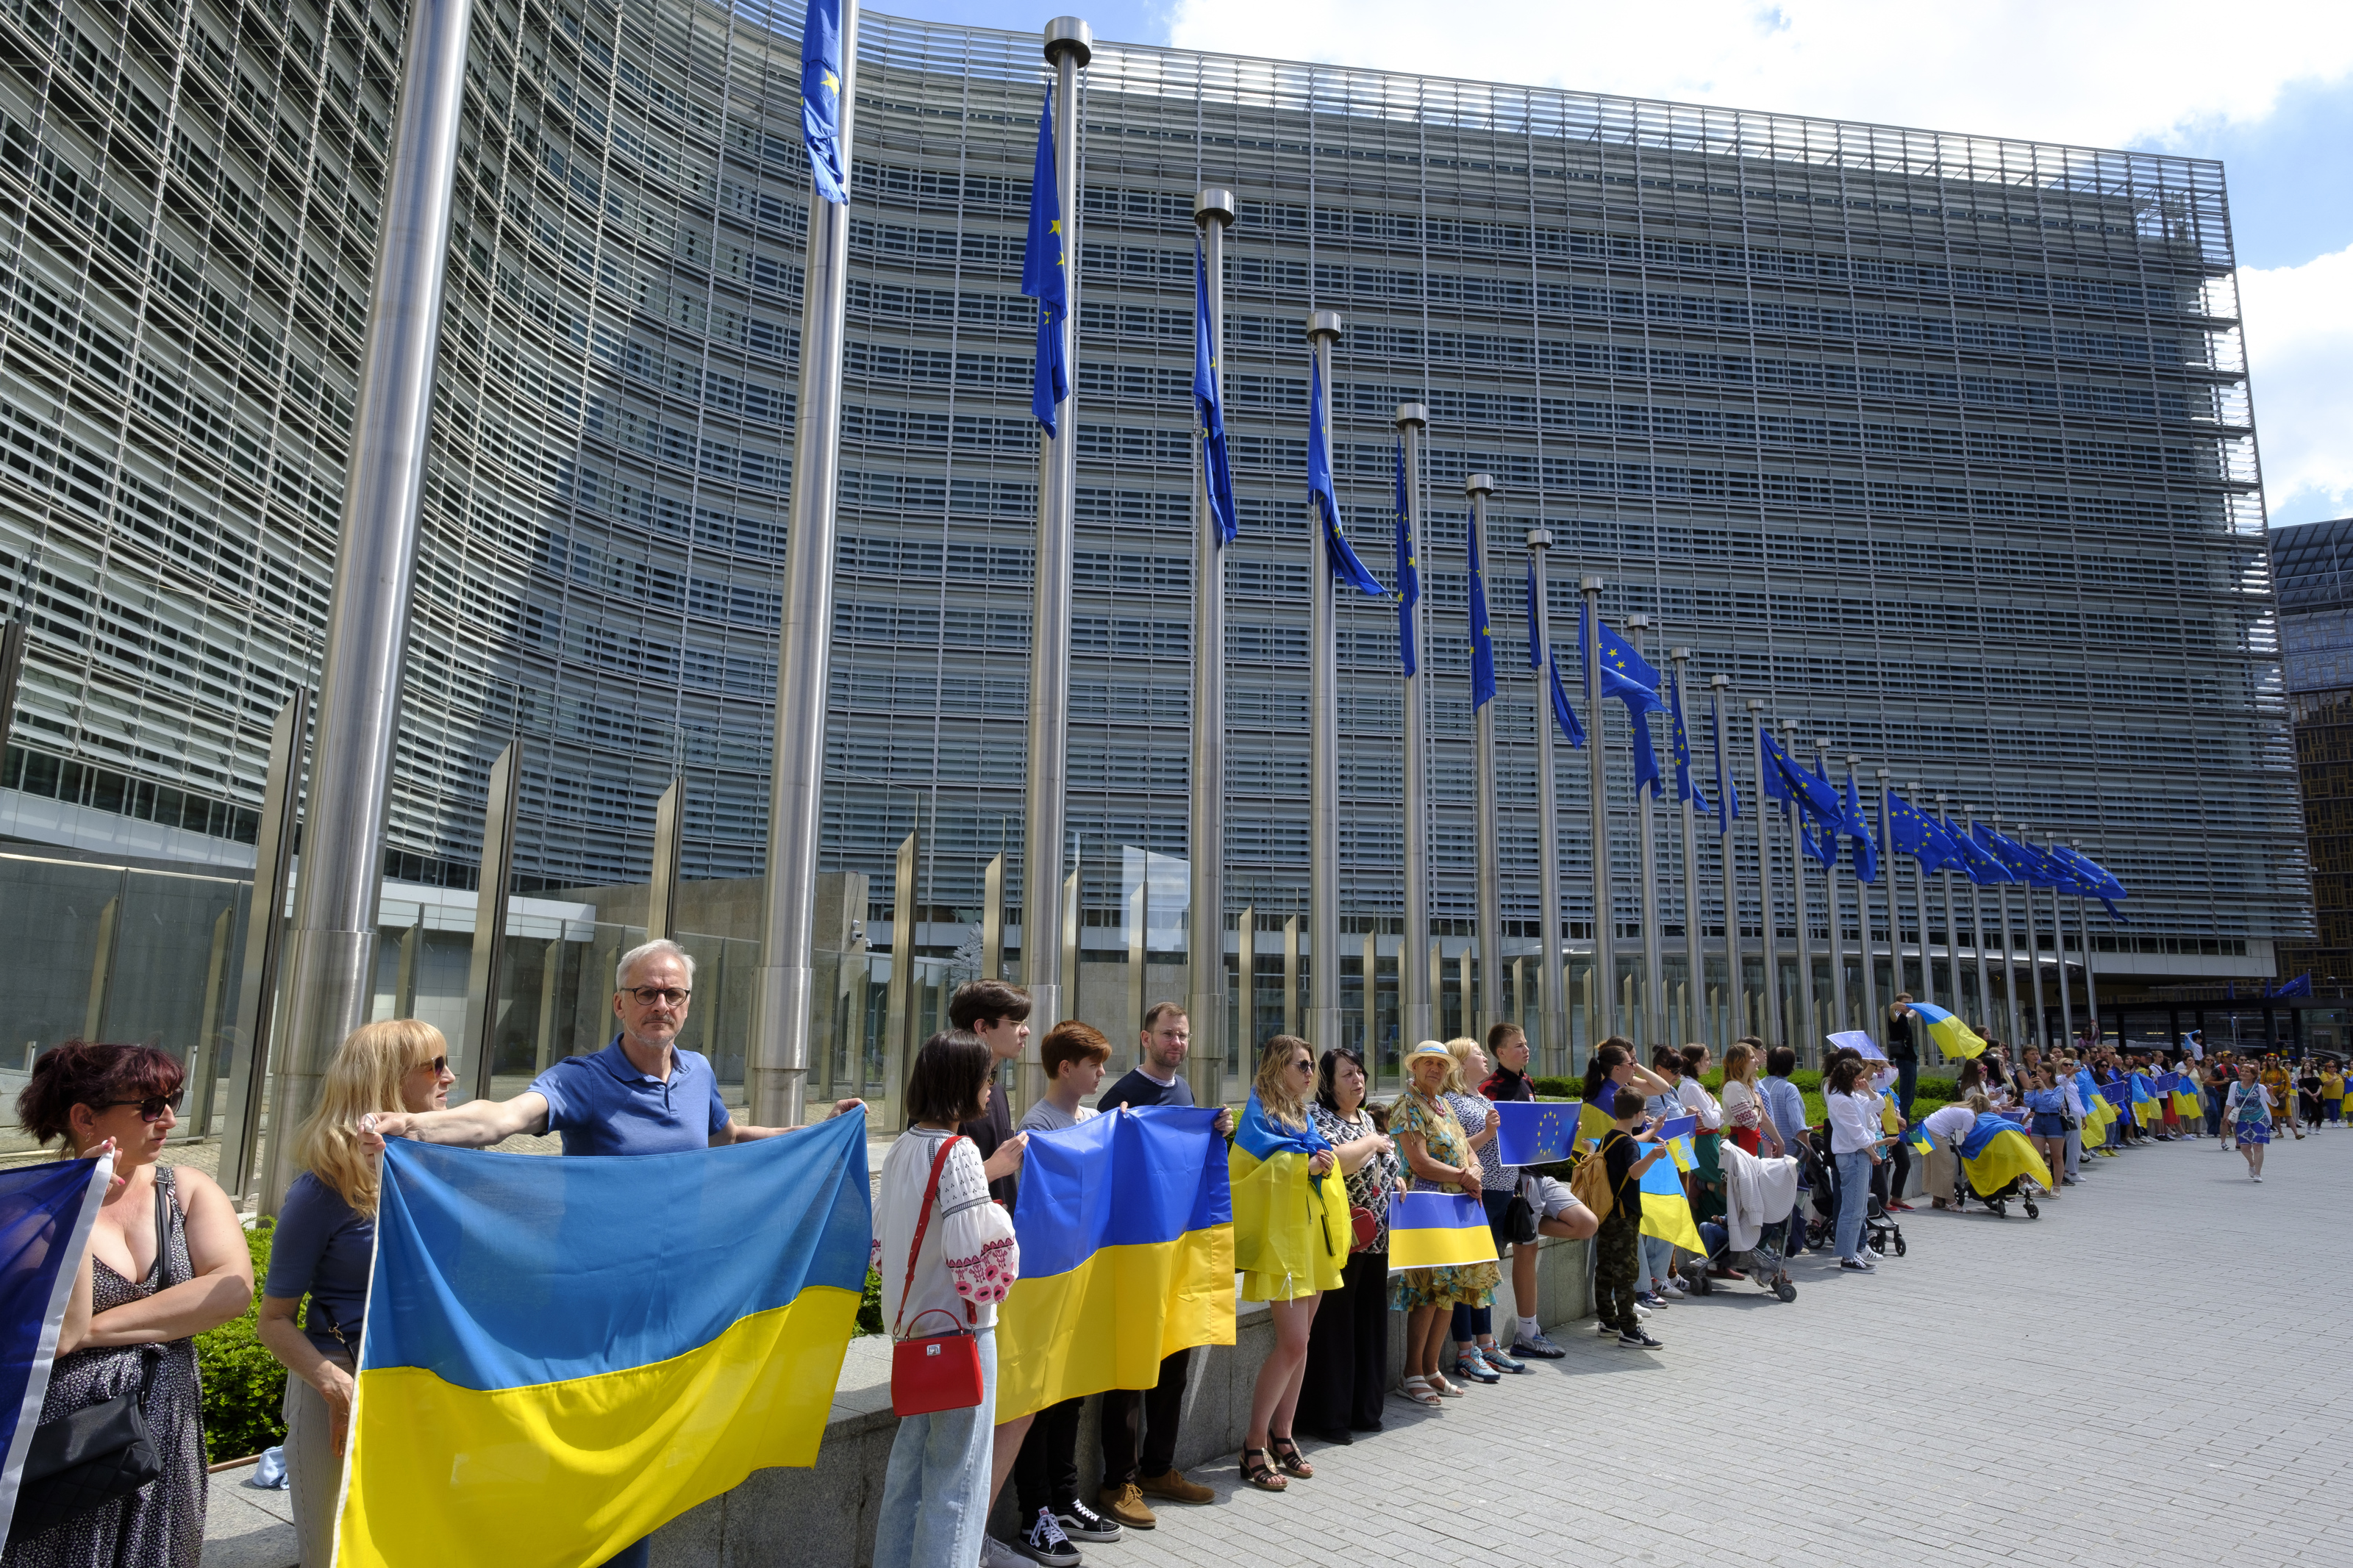 Ukraine is set to receive EU candidate status, but when is membership coming?